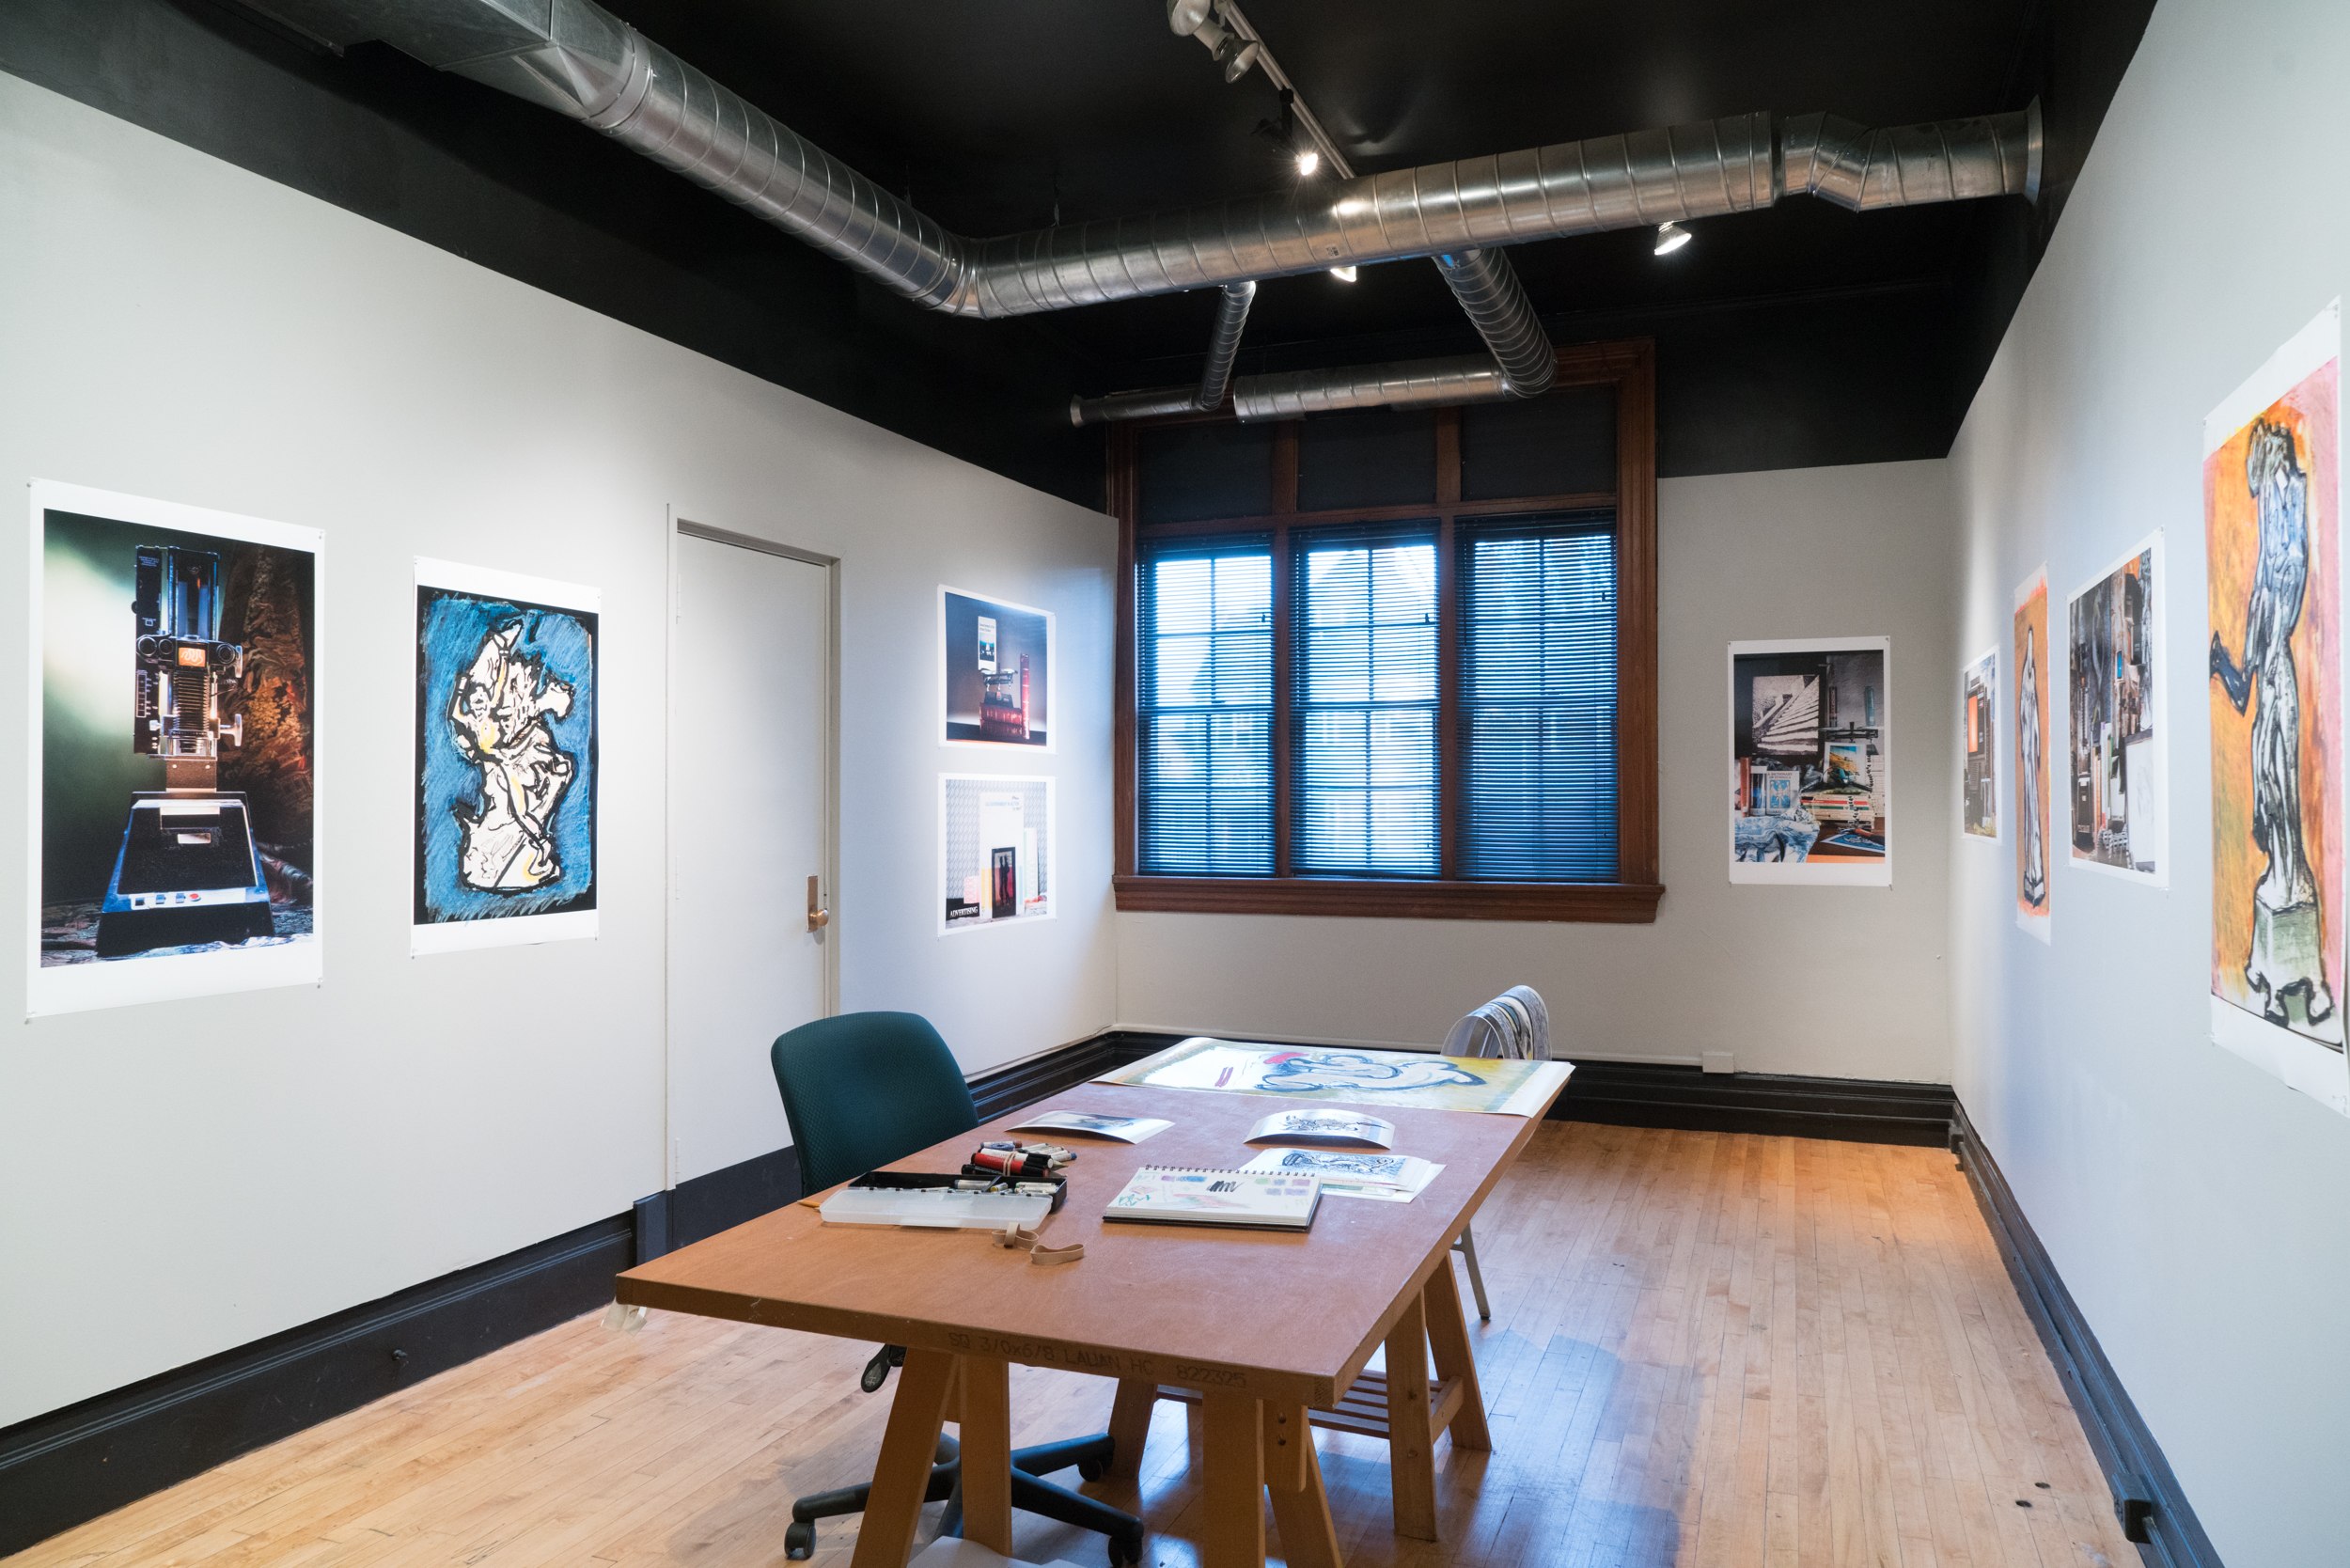 Installation view at the Visual Studies Workshop